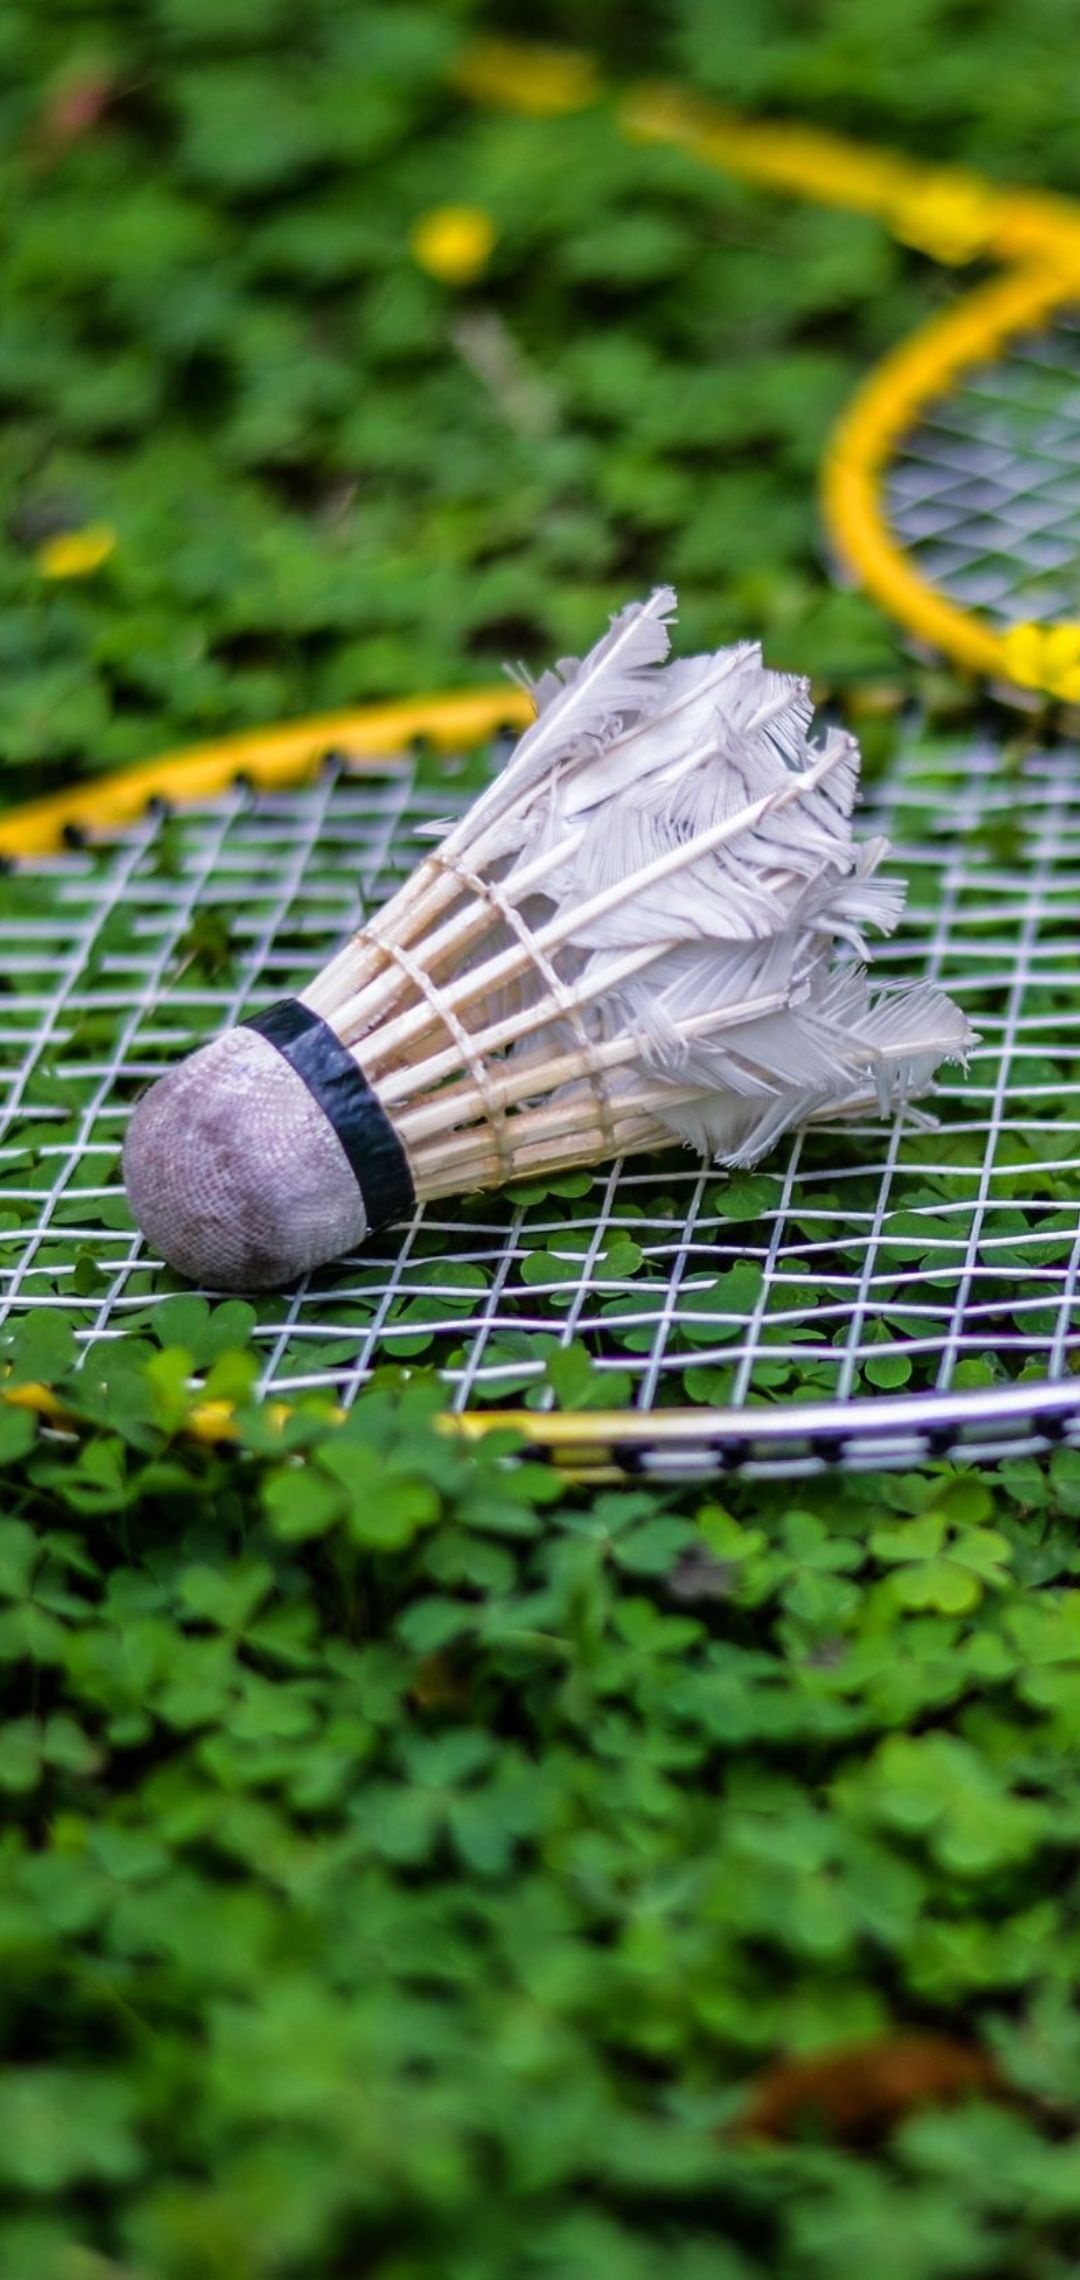 Badminton action shots, HD wallpapers, Dynamic movement, Energetic players, 1080x2280 HD Phone